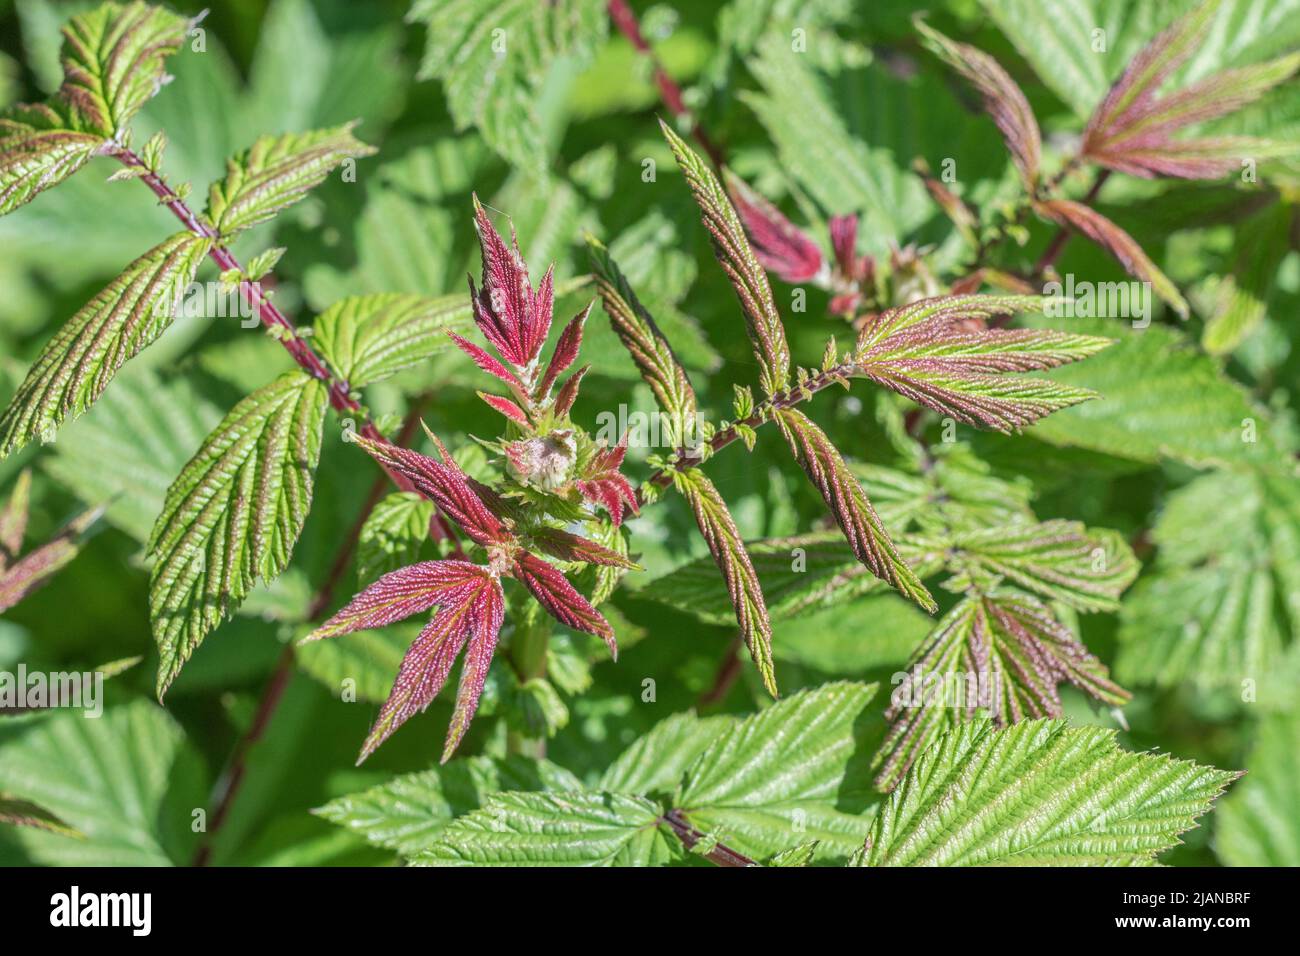 Young, red-purple tinged, leaves of Meadowsweet / Filipendula ulmaria in roadside ditch. Once used as medicinal plant for aspirin-like content. Stock Photo